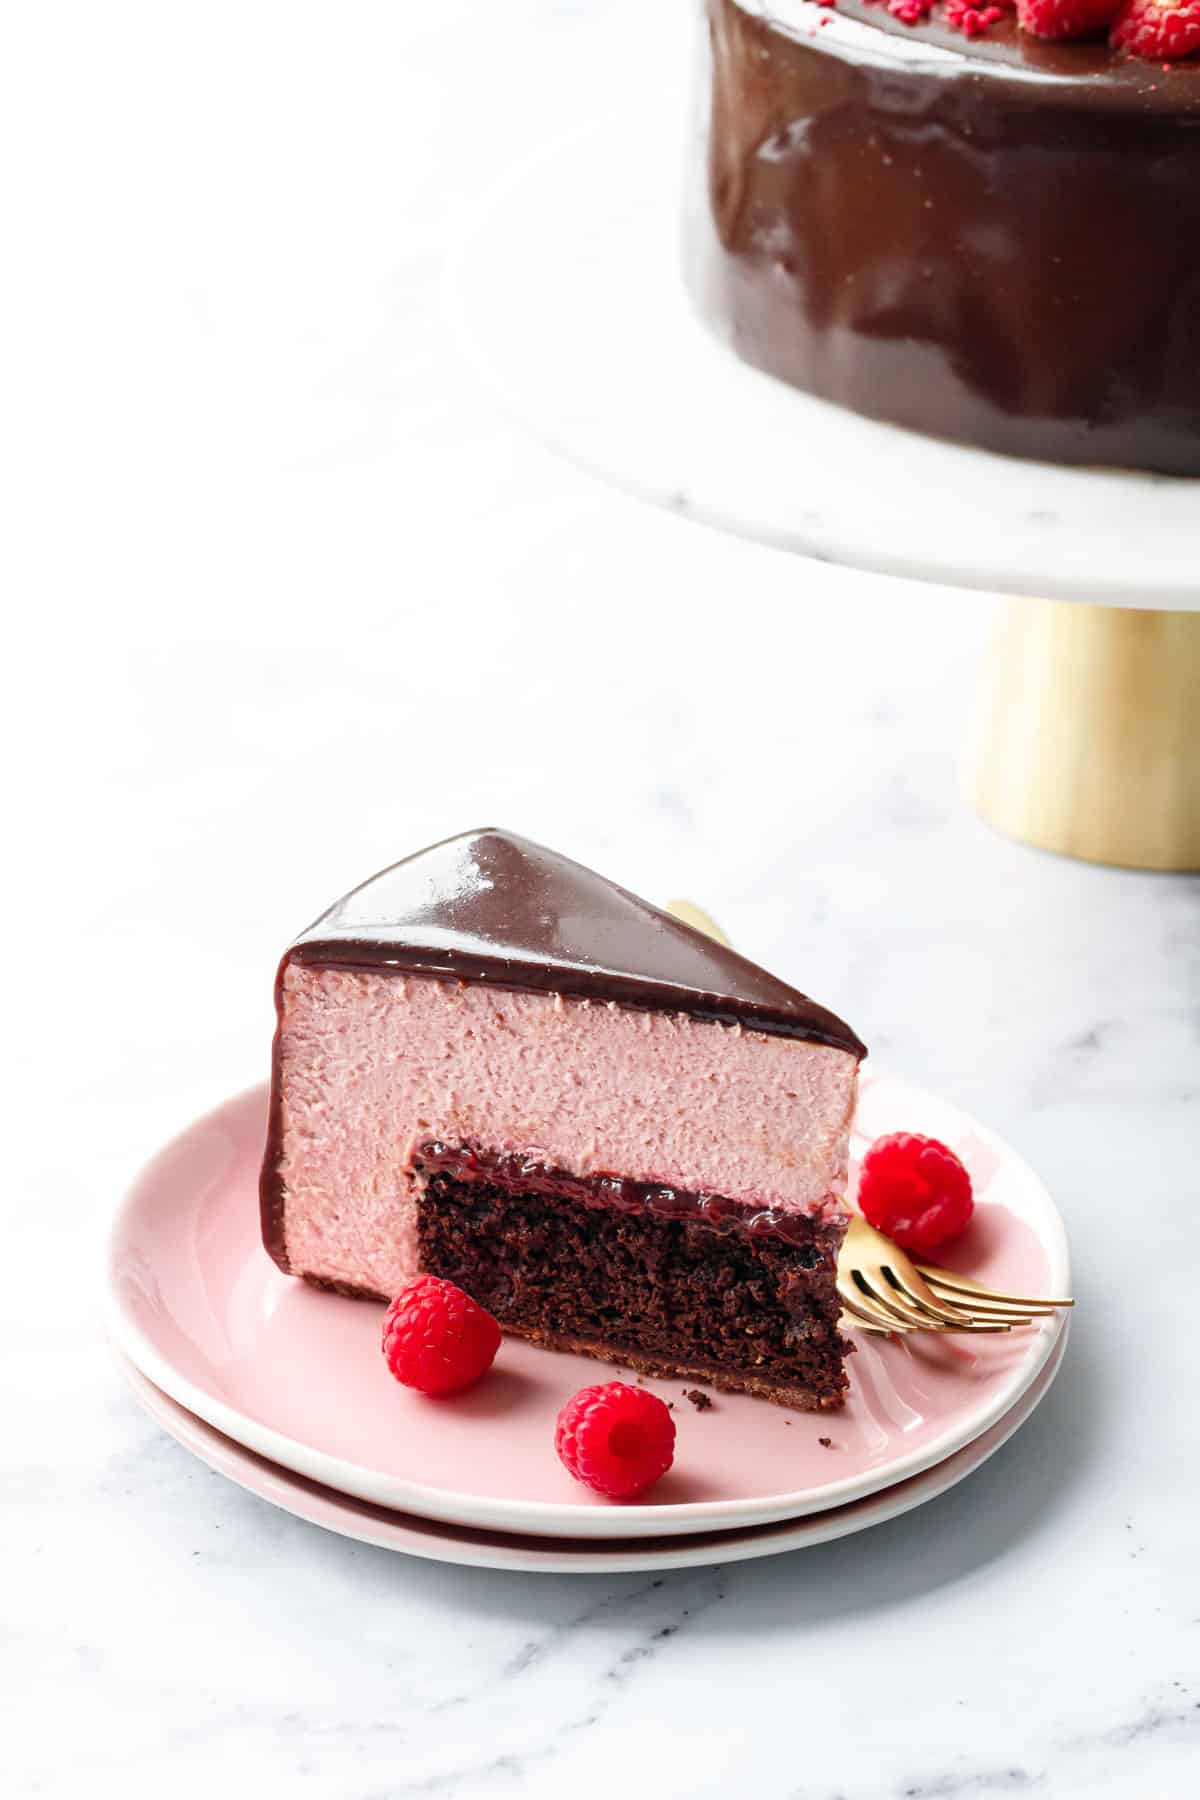 Slice of Chocolate Raspberry Mousse Cake cut into a perfect triangular slice to show the distinct layers inside (cake, jam, and pink mousse) on a pink plate with cake stand in the background.